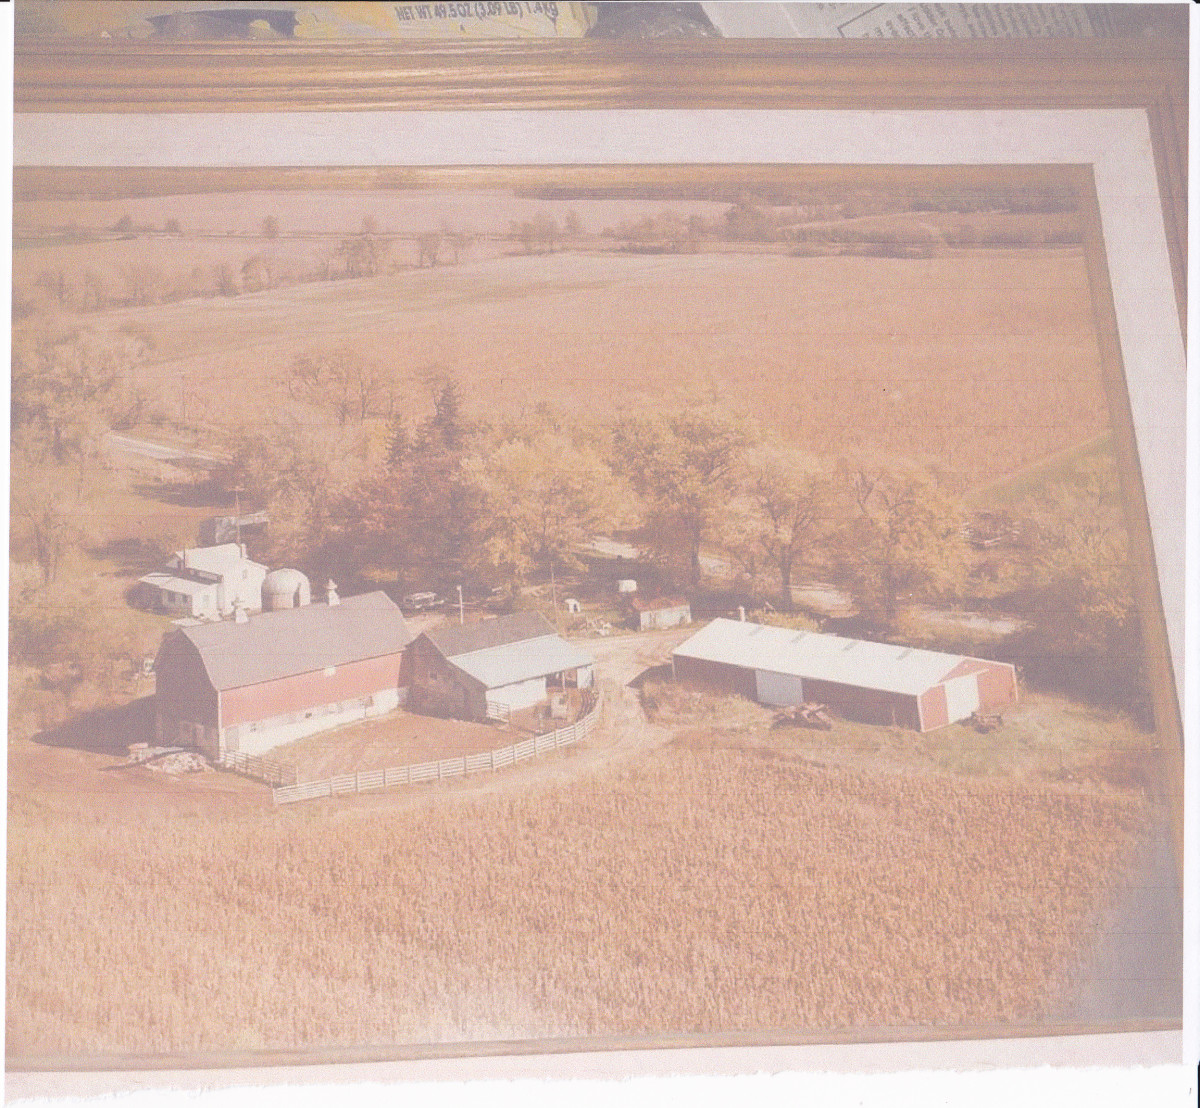 The 35 acres across the road are found at the top of the picture. Photo taken probably in 1970s